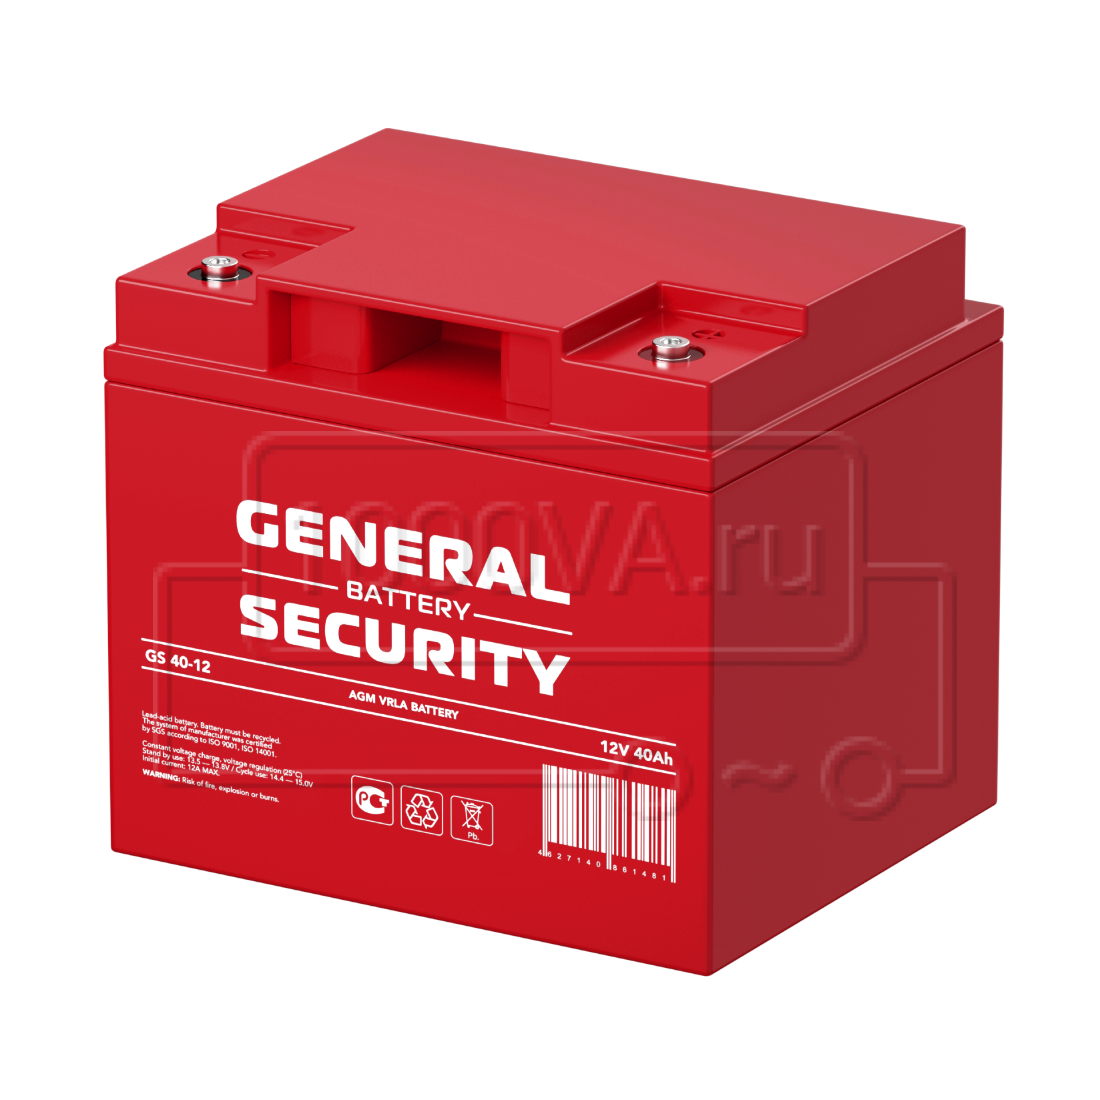 General Security GS 40-12